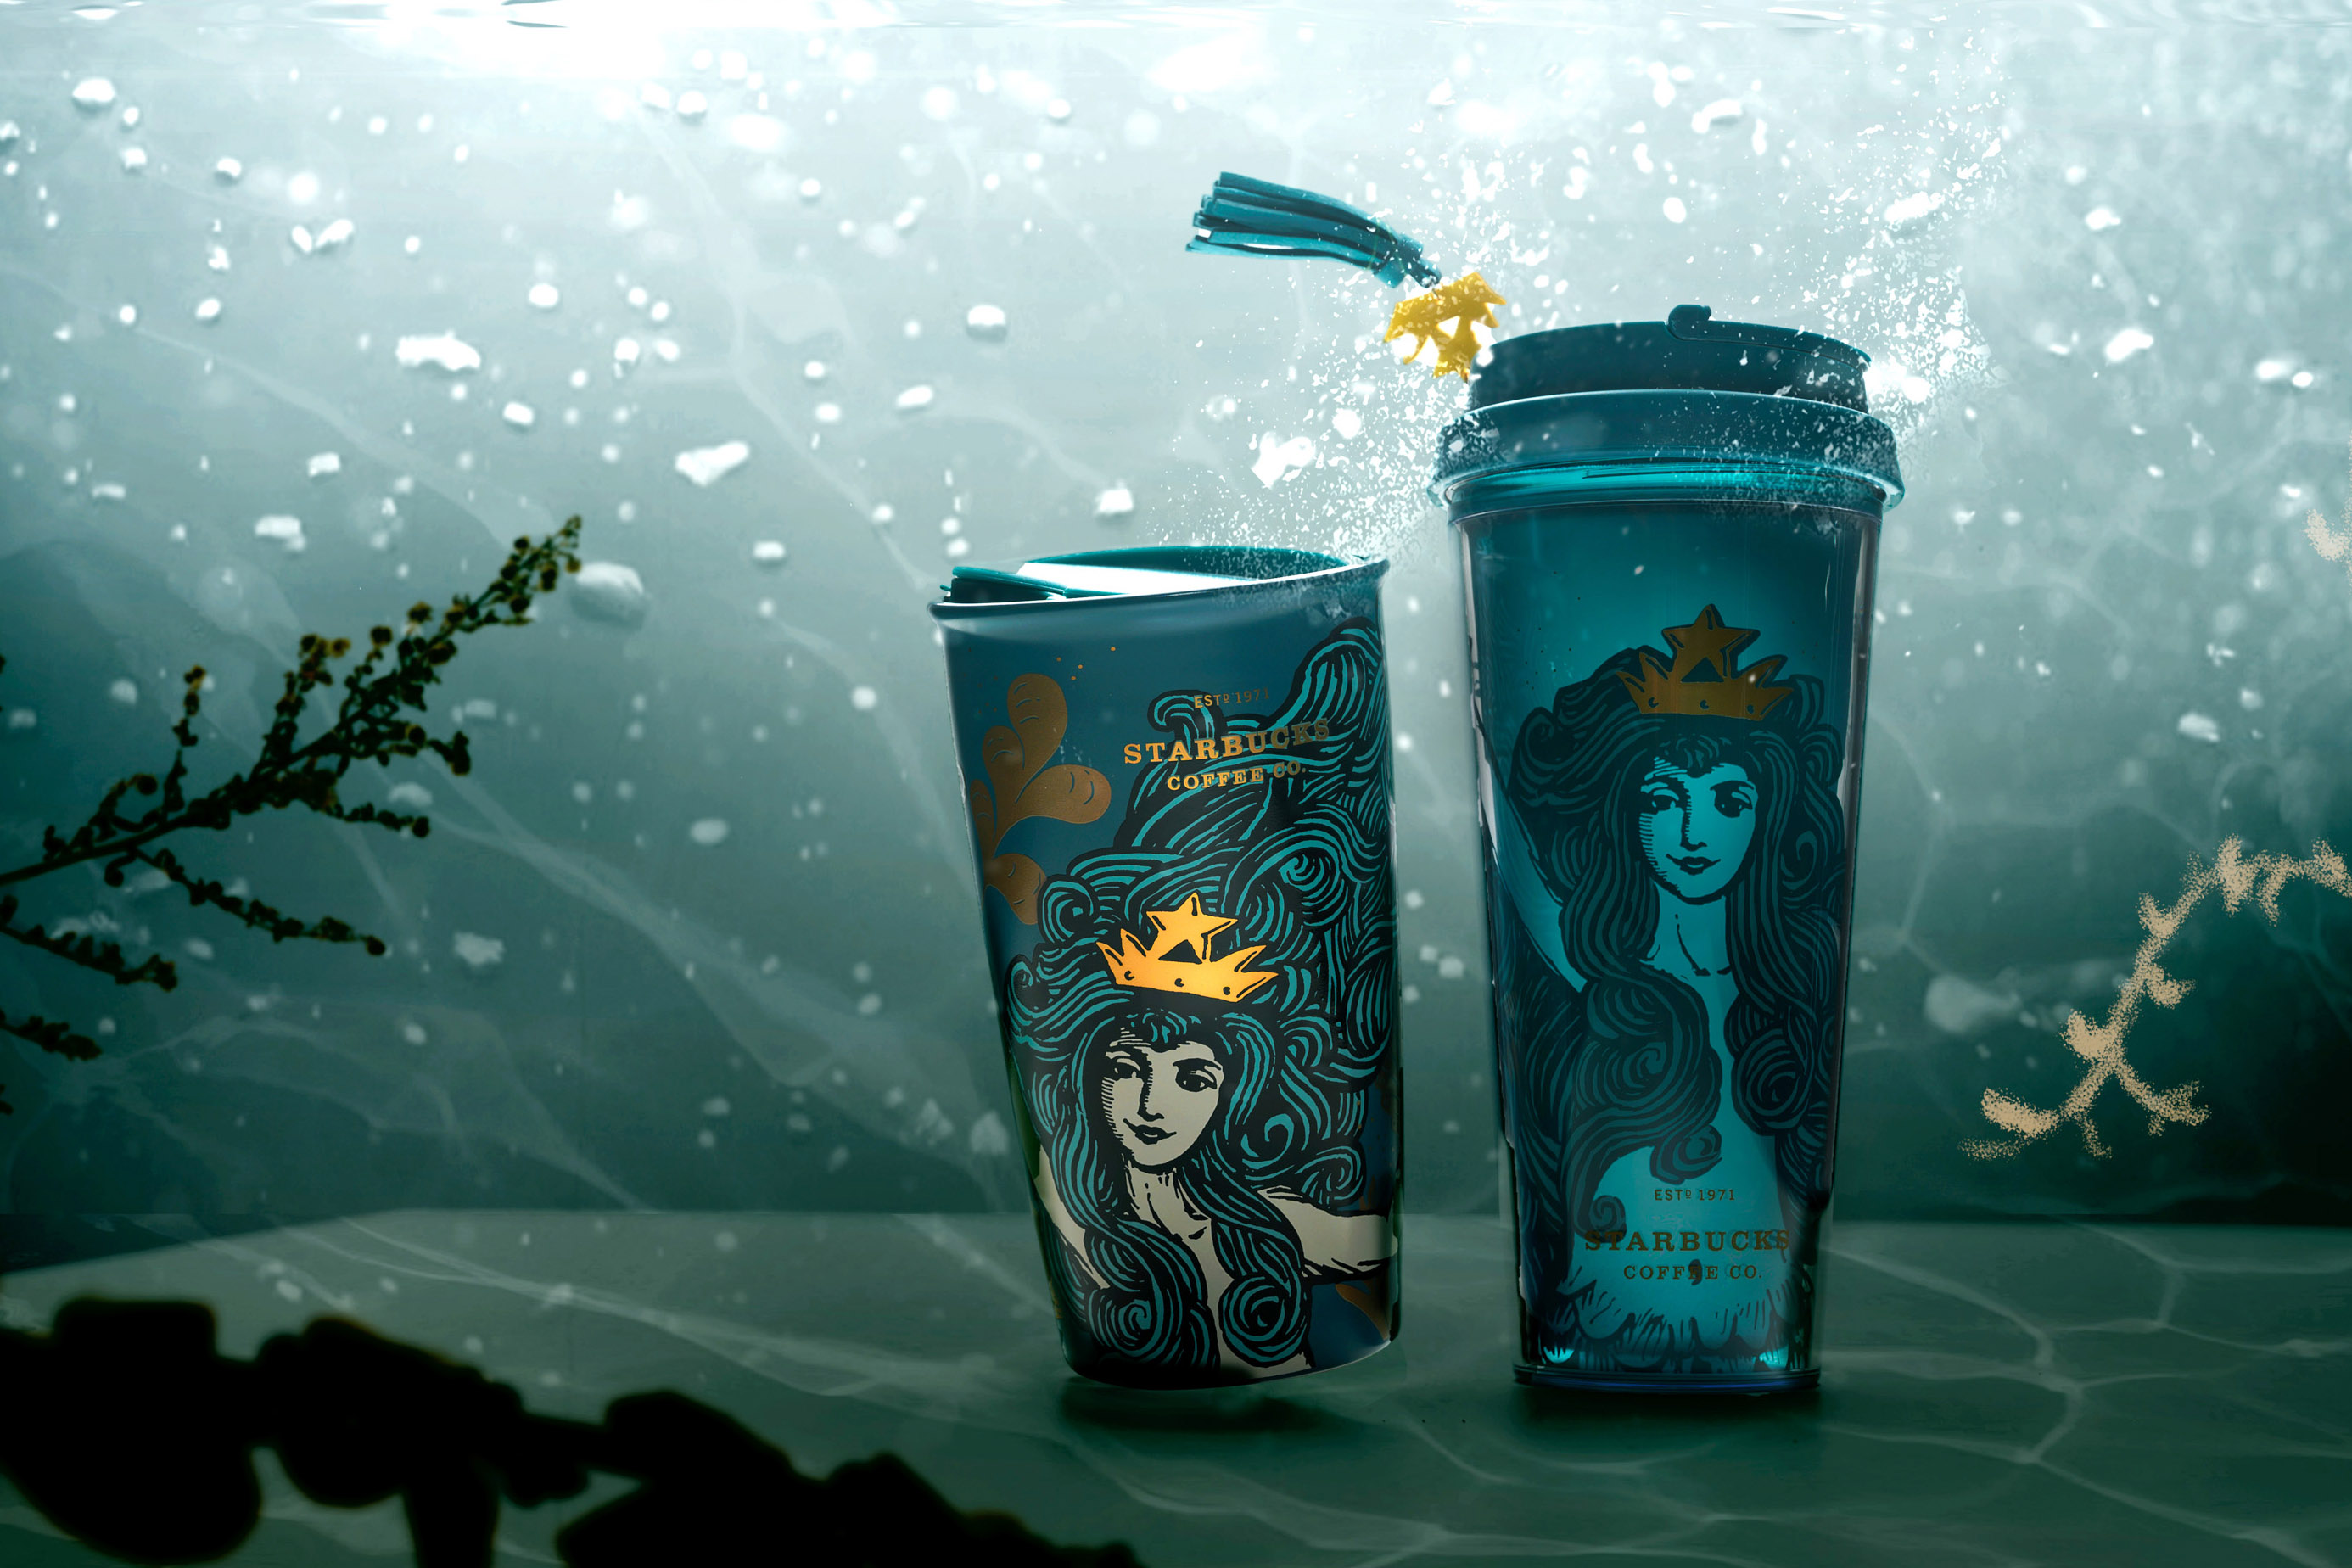 Starbucks Singapore welcomes Autumn with all-new beverages, merchandise, and a 9/9 promotion you shouldn’t miss - Alvinology